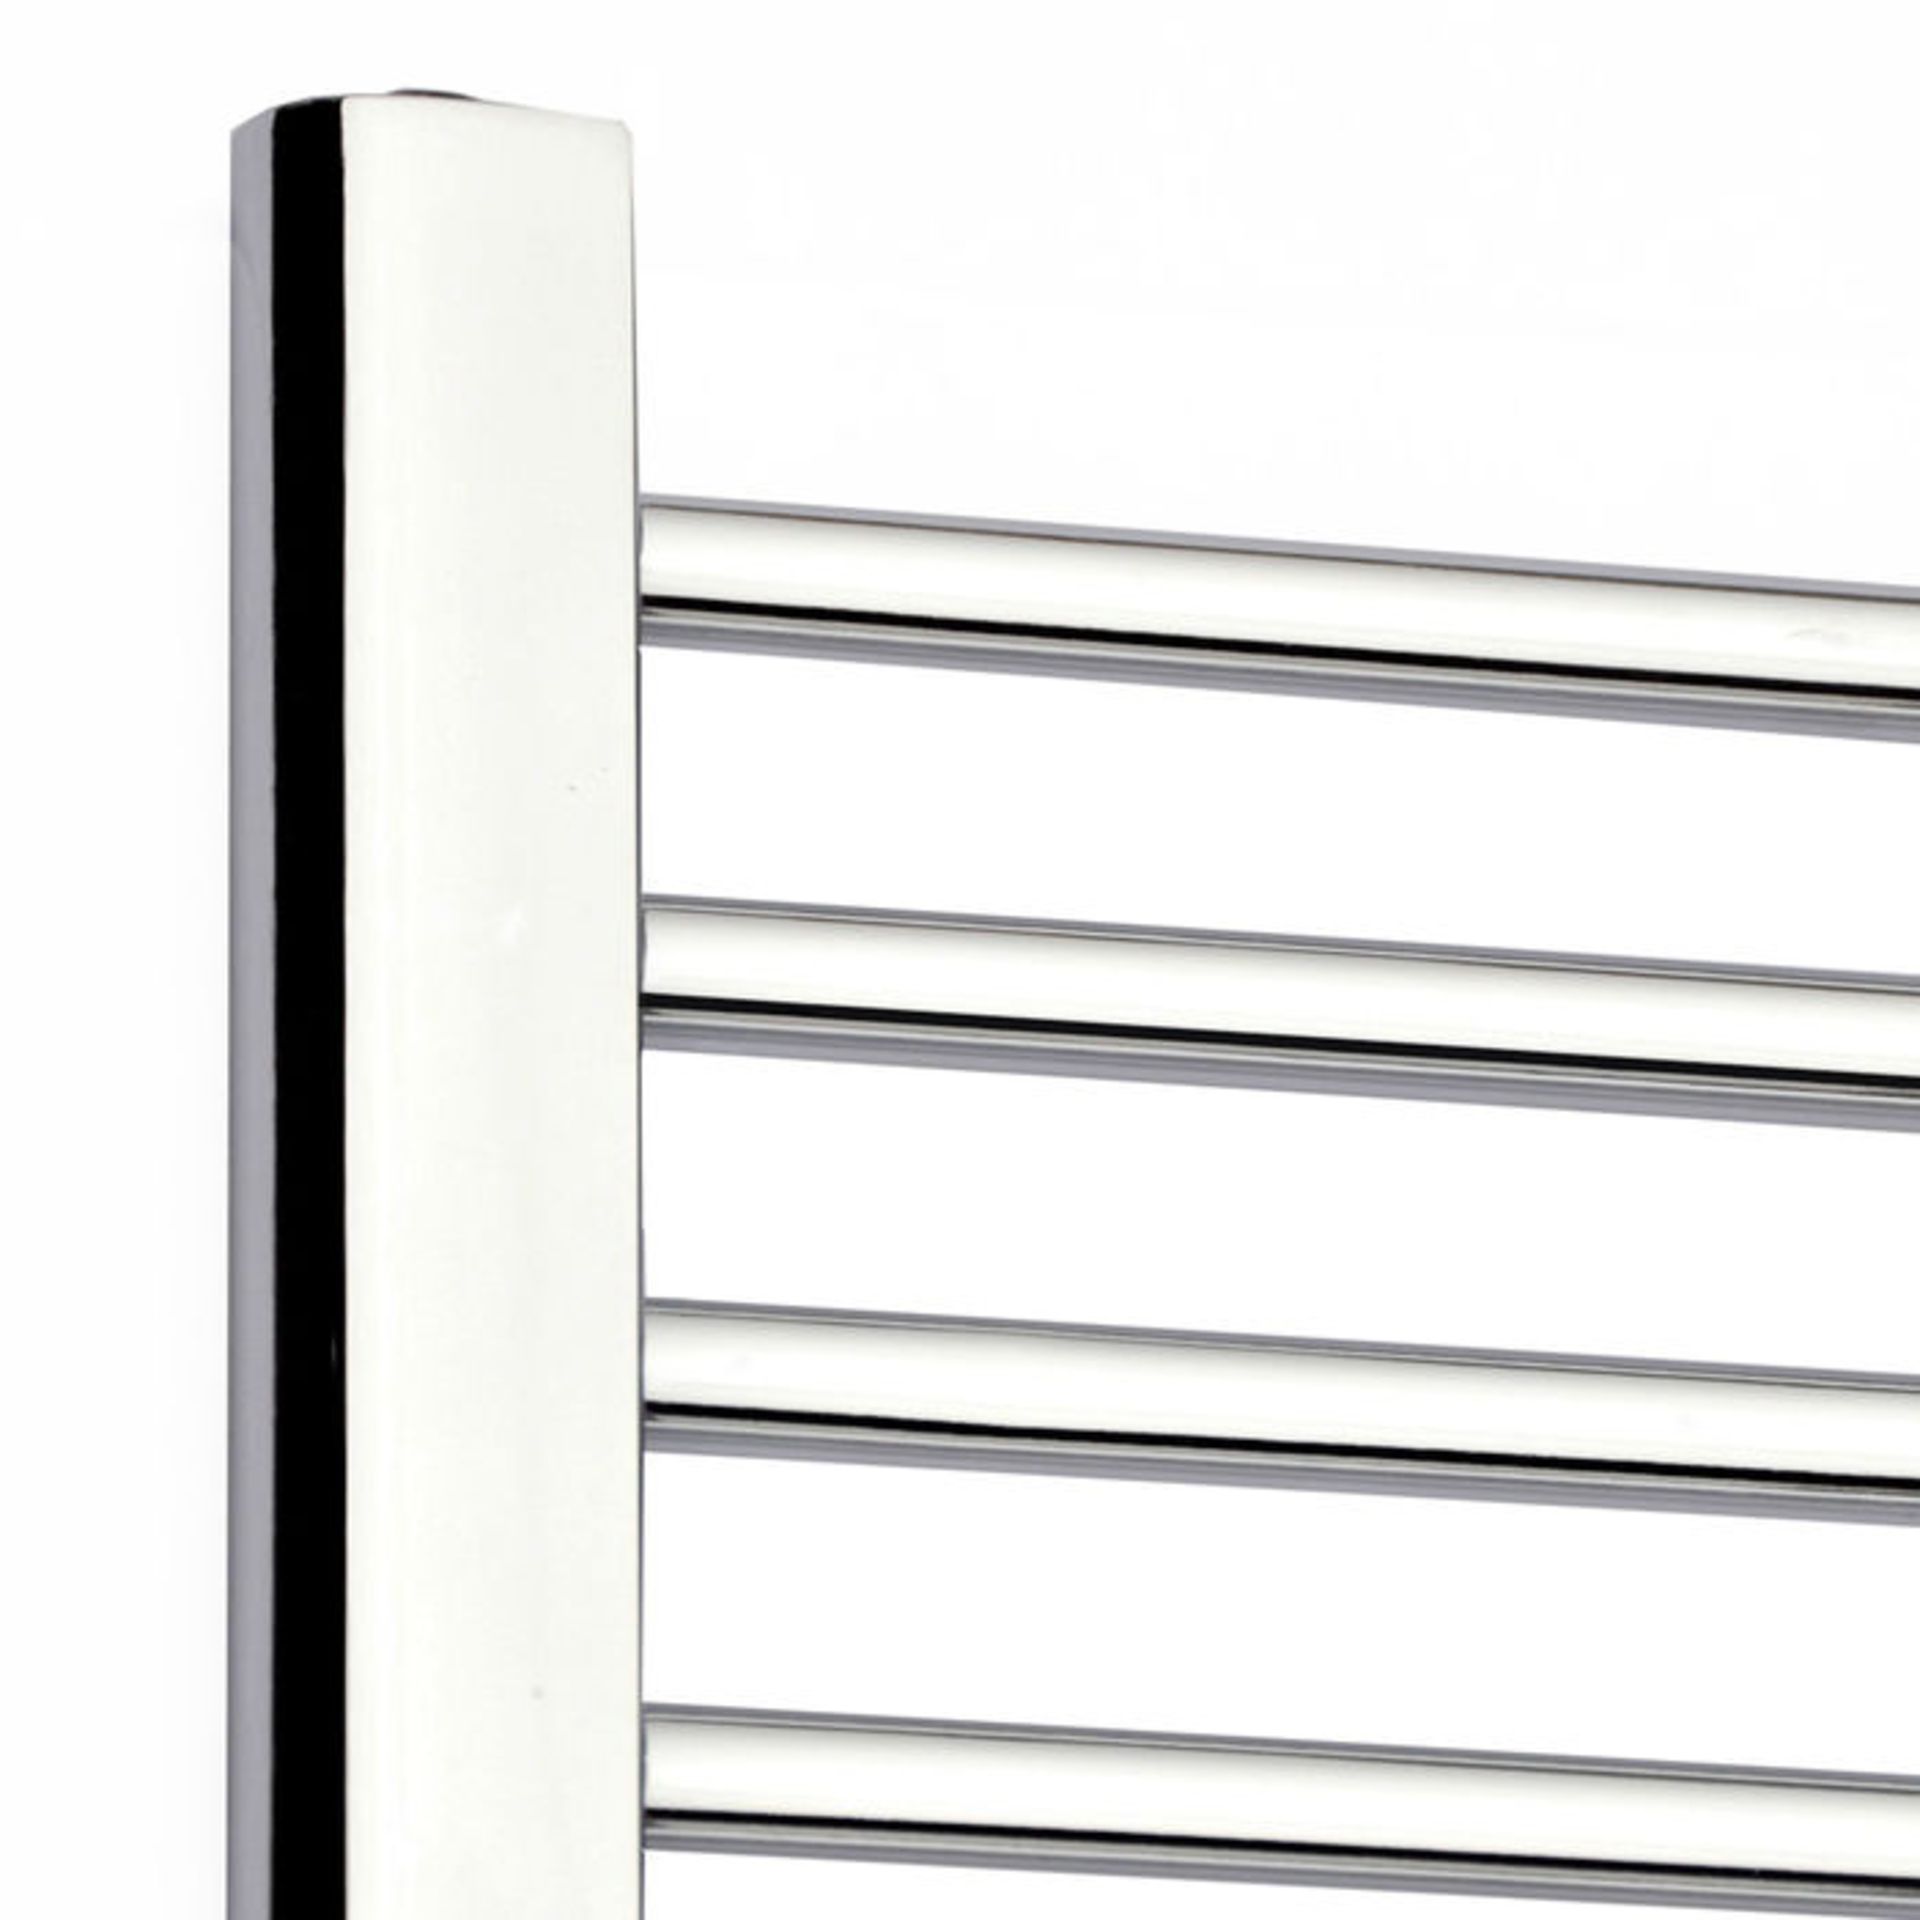 (KR201) 650x400mm Straight Heated Towel Radiator. Low carbon steel chrome plated radiator This - Image 3 of 3